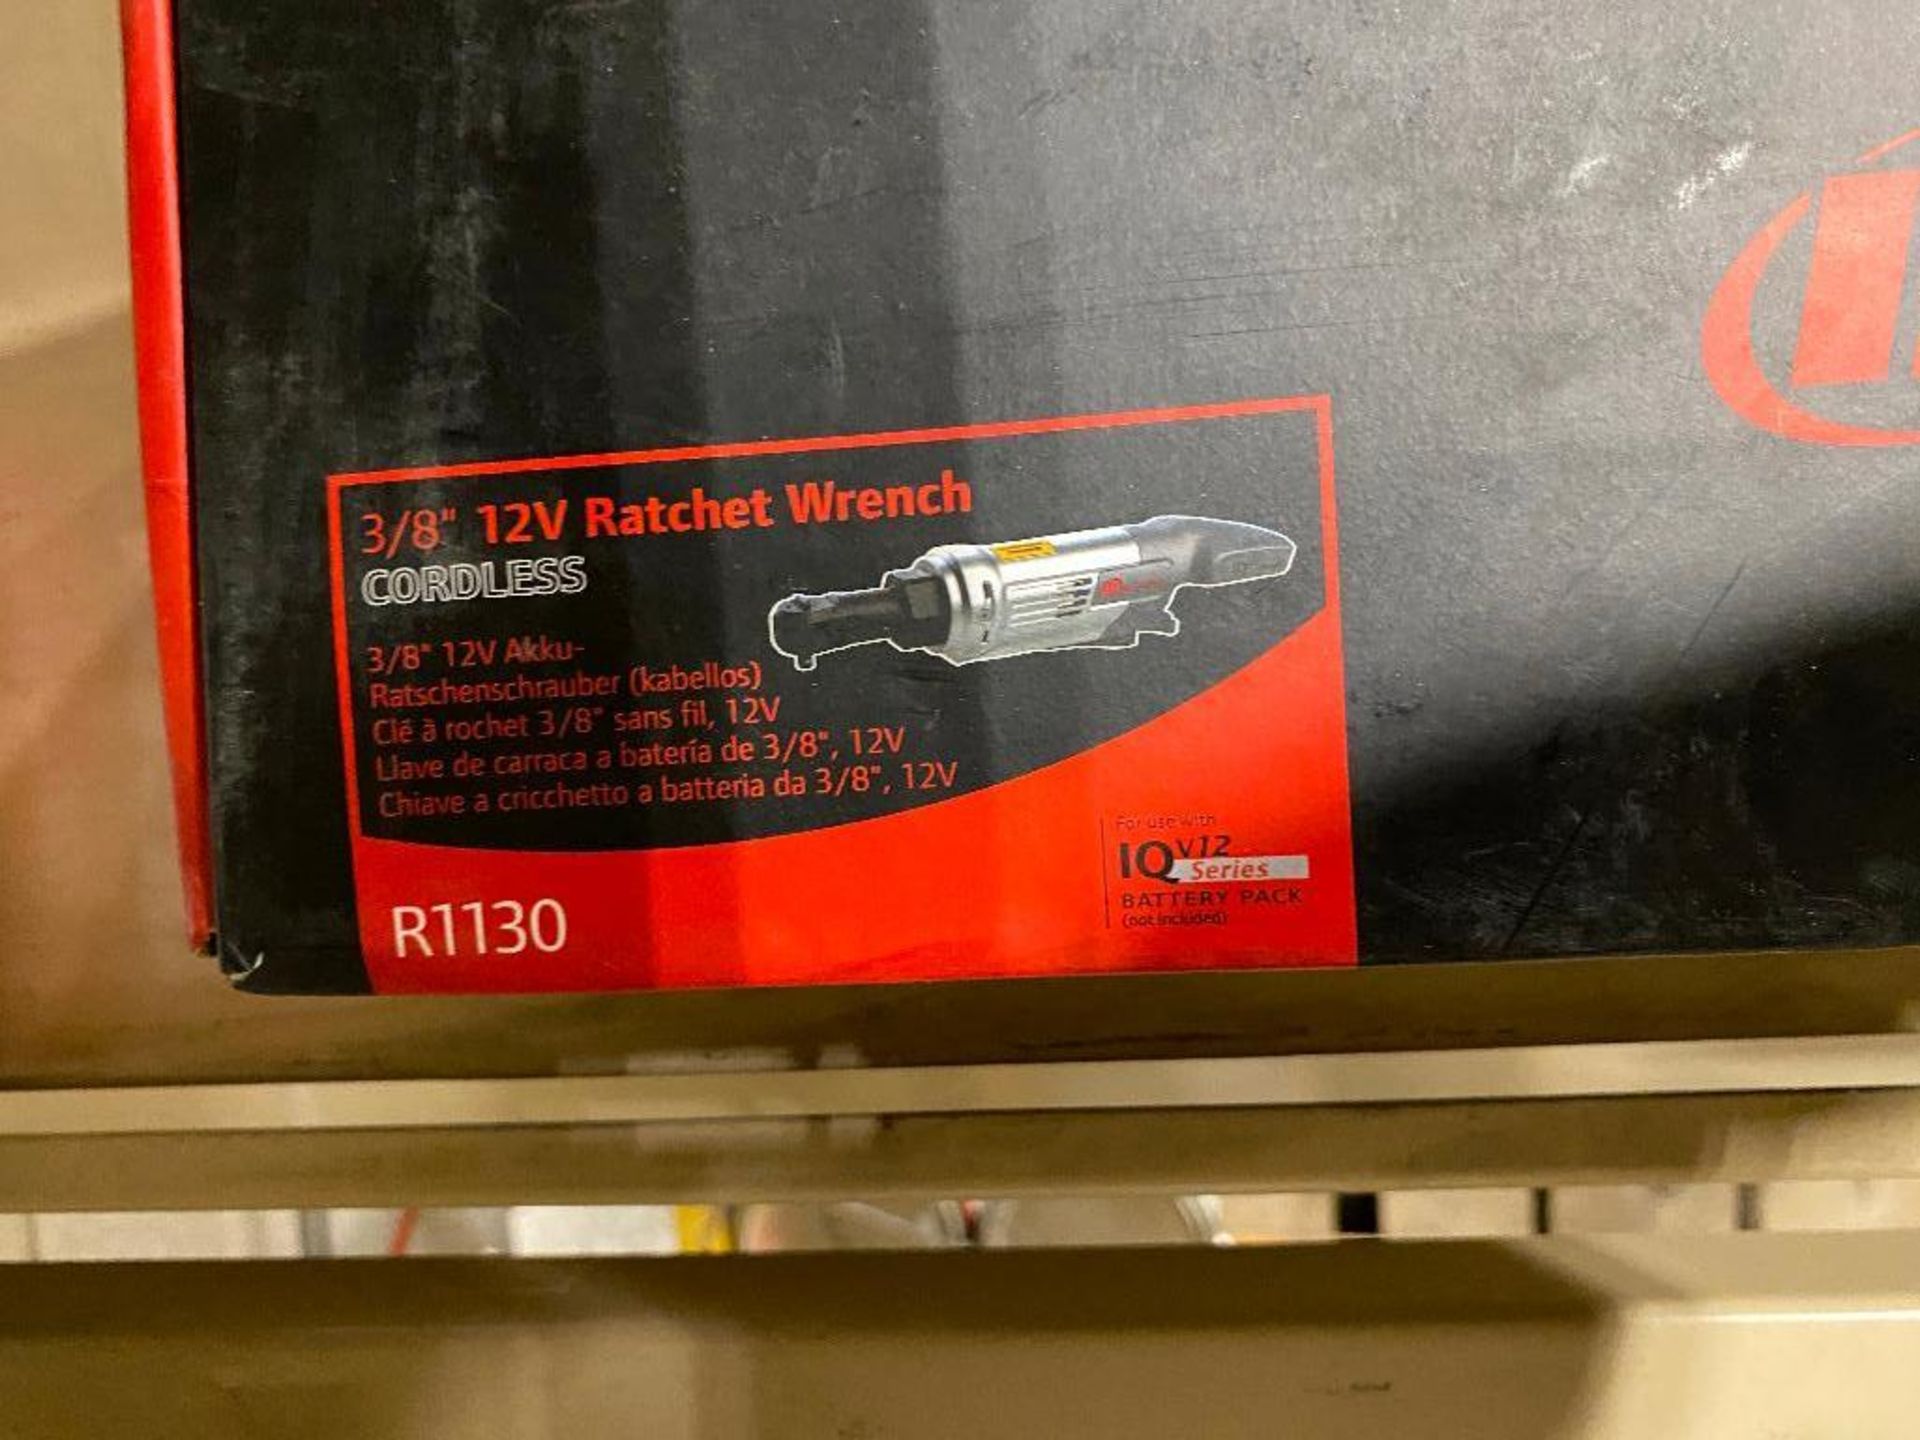 Ingersoll Rand R1130 3/8" 12V Cordless Ratchet Wrench - Image 2 of 2